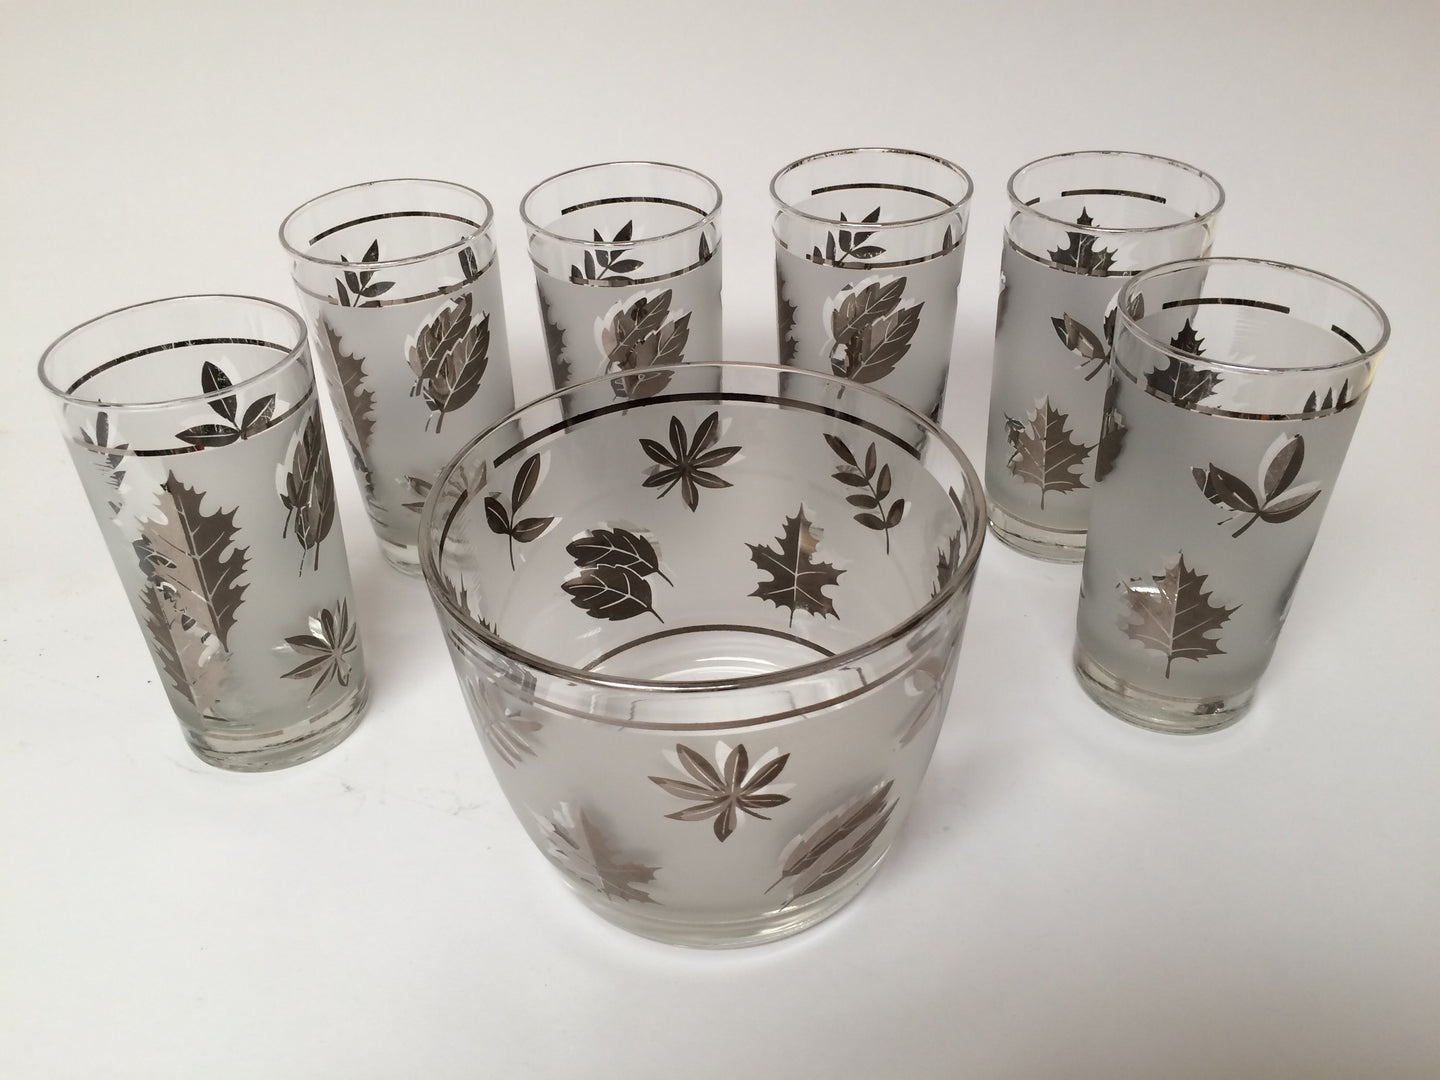 Set of 6 Vintage Libbey Starlyte Frosted Tumblers and Matching Ice Bucket with Silver Leaf Pattern with matching Ice Bucket